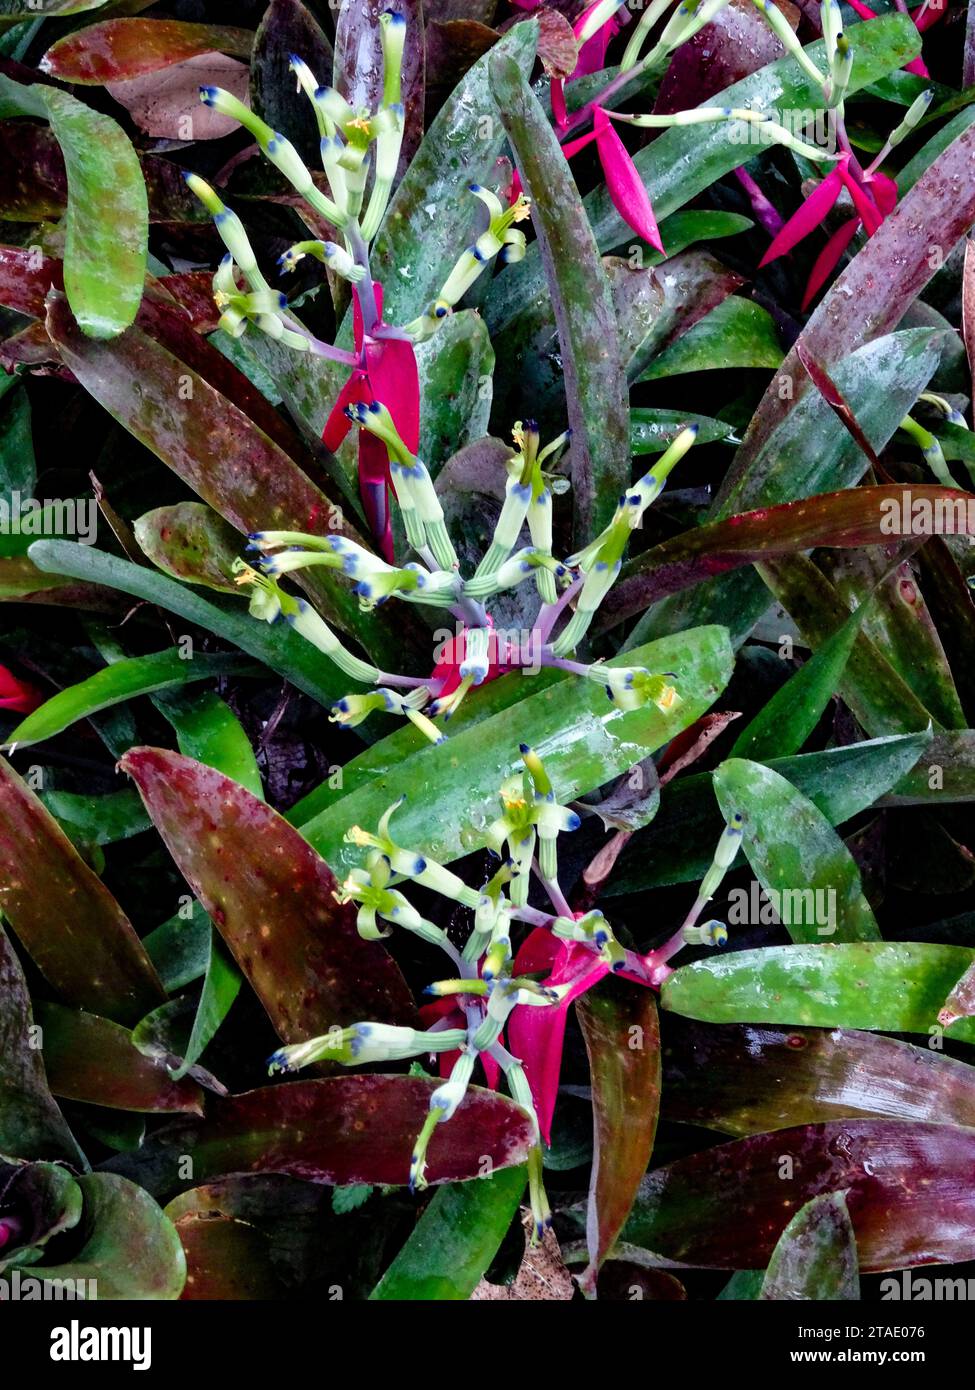 Chaotic natural close up environmental flowering plant portrait of Billbergia Amoena,flowering on mass Stock Photo